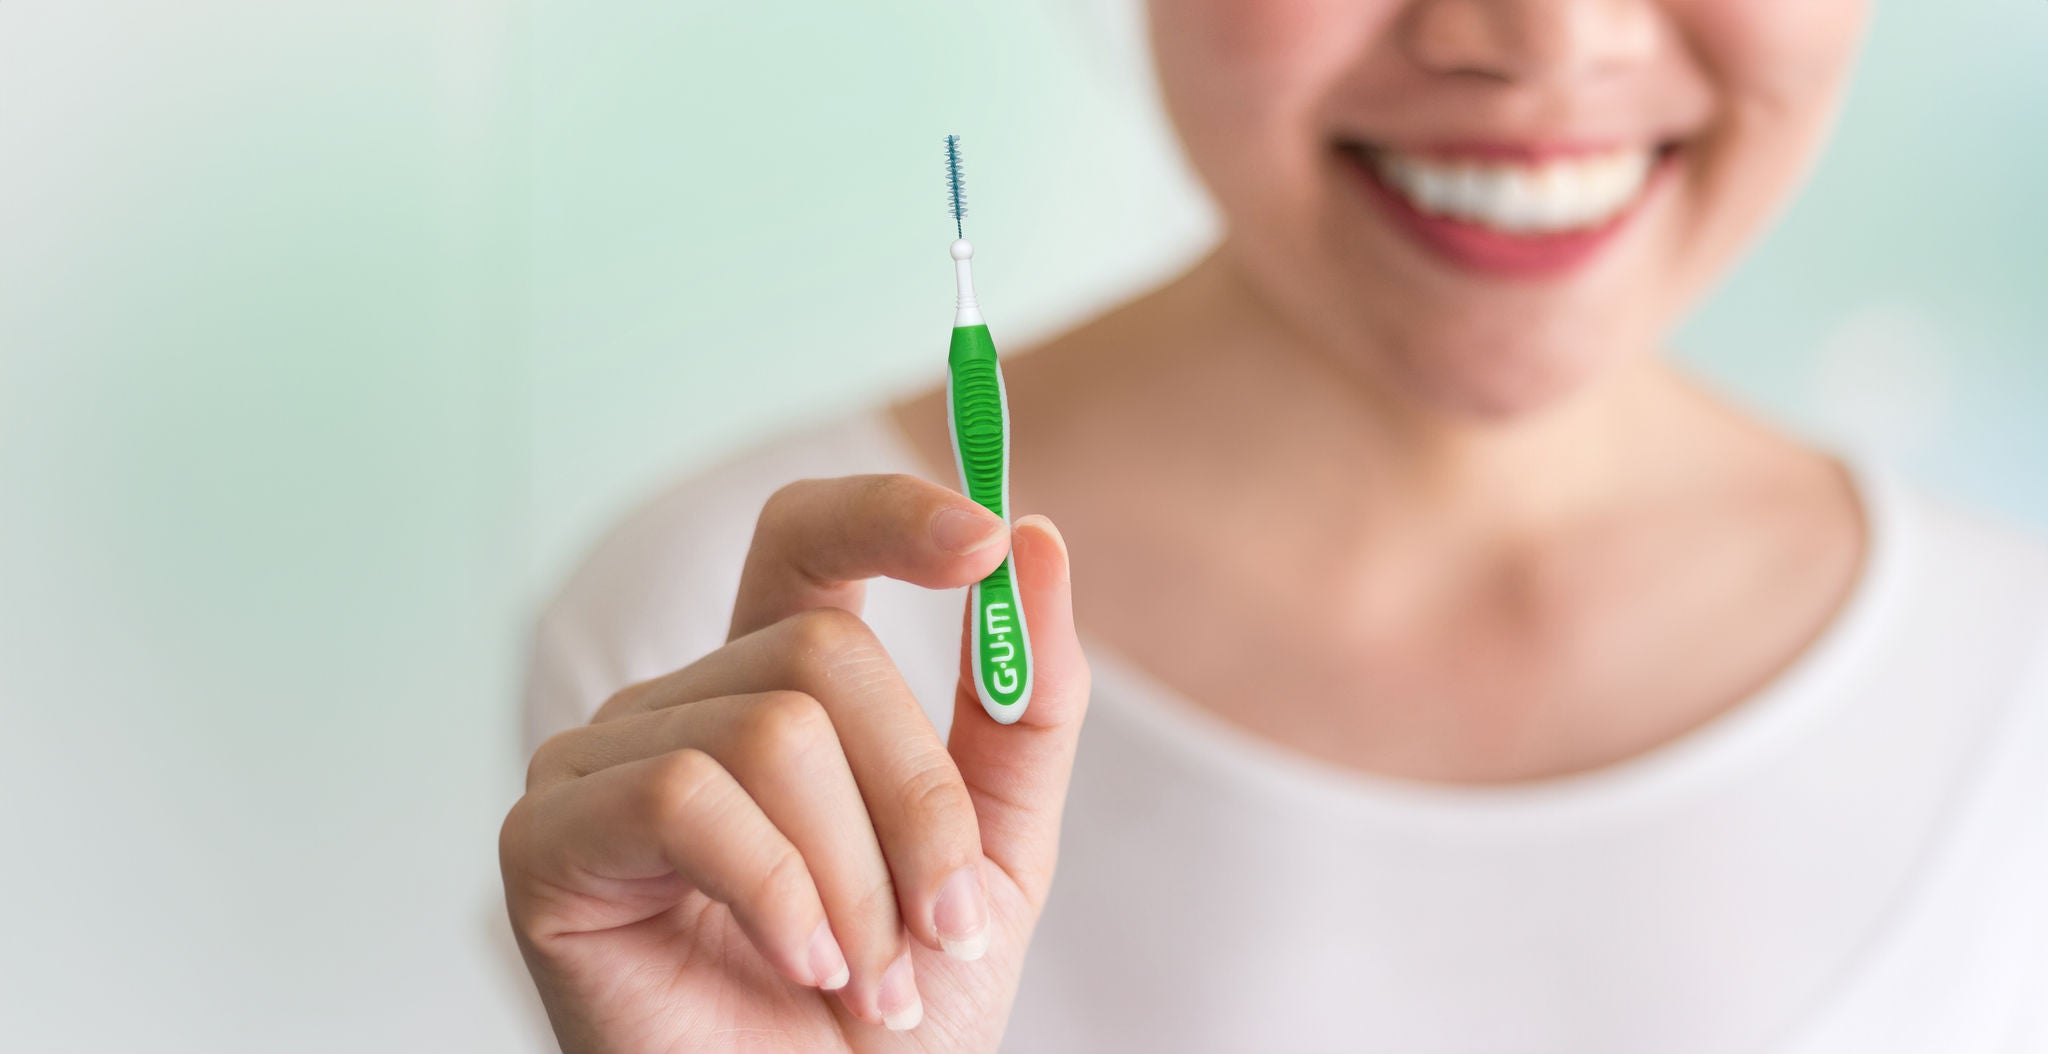 Interdental Brushing: What Is It & Why Is It Effective